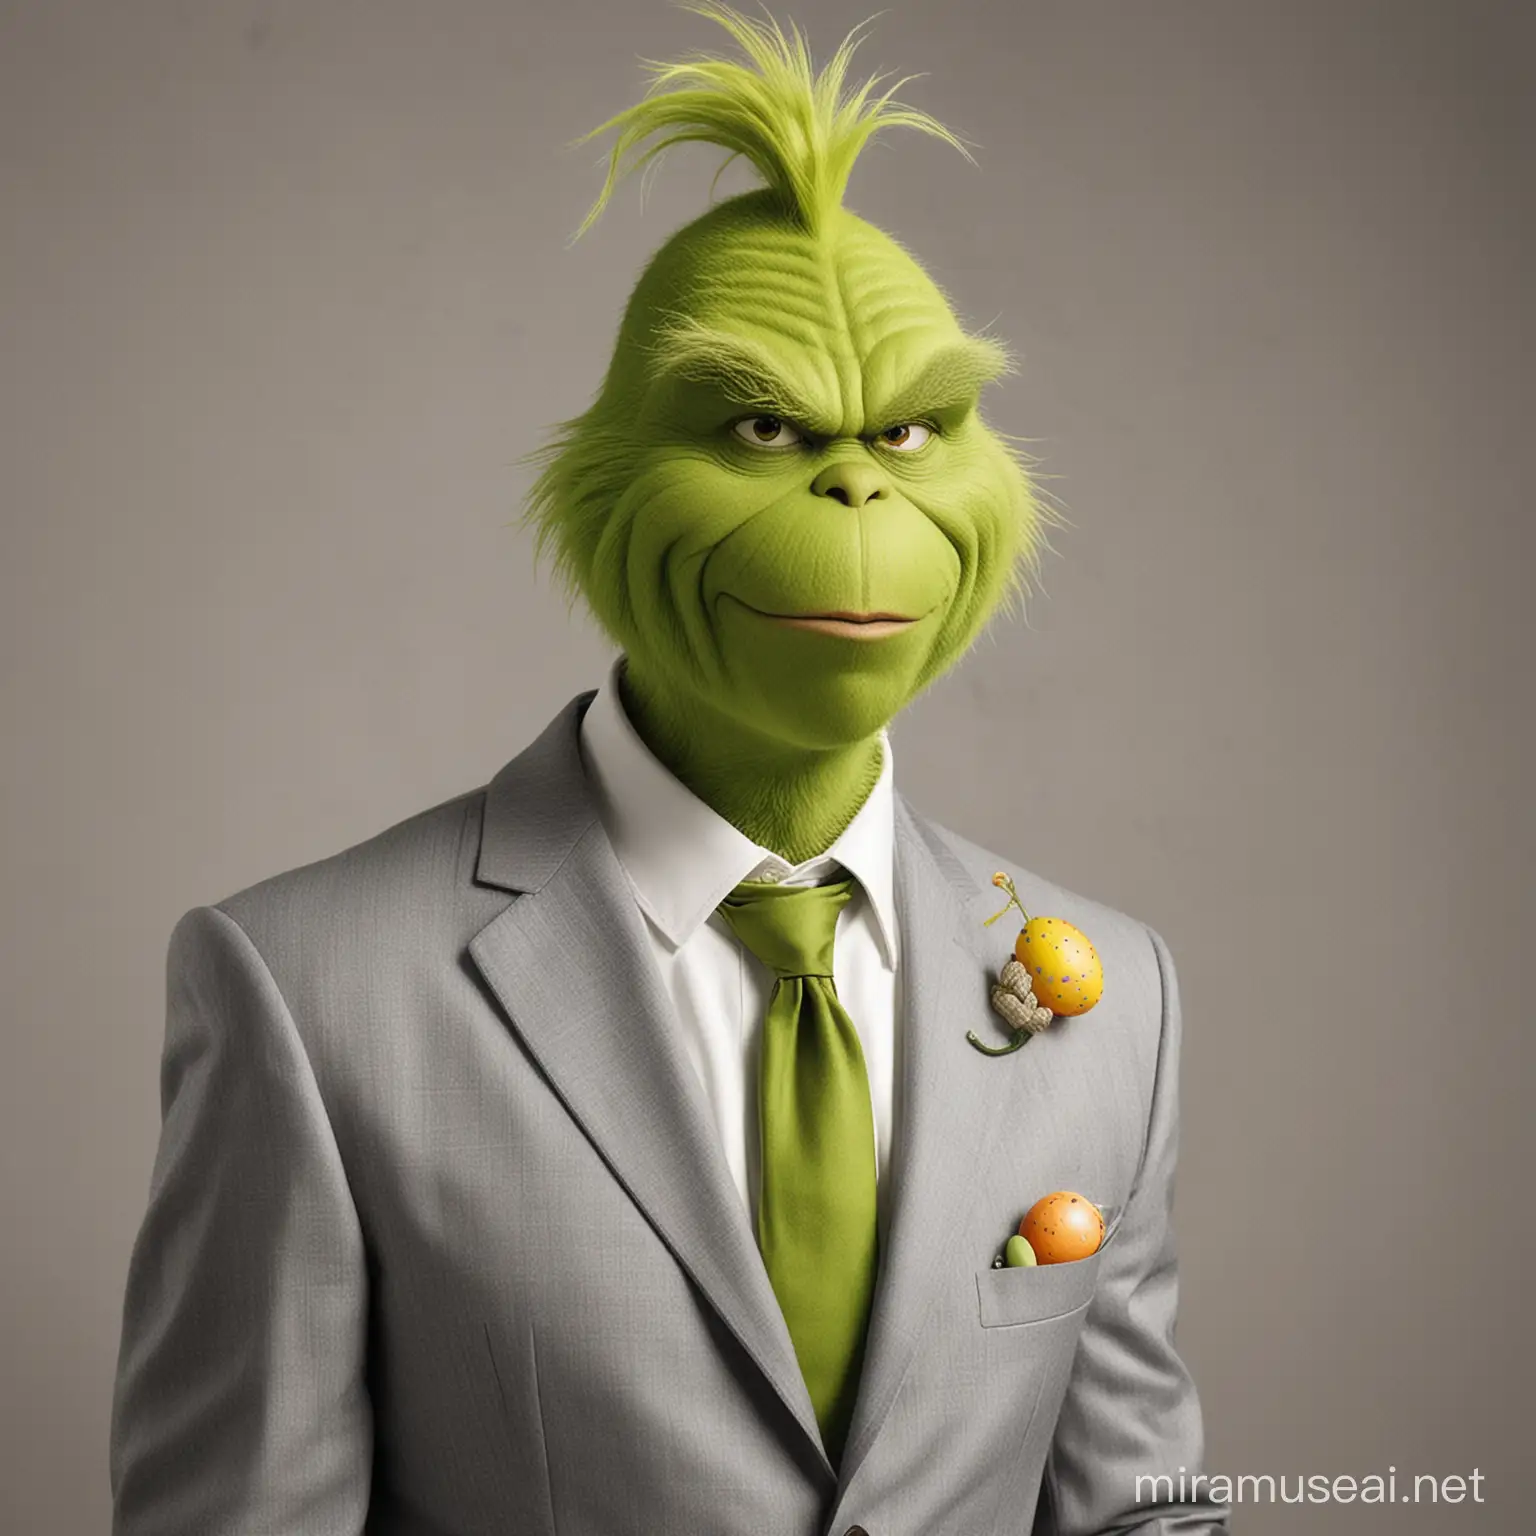 The grinch in a suit celebrating Easter